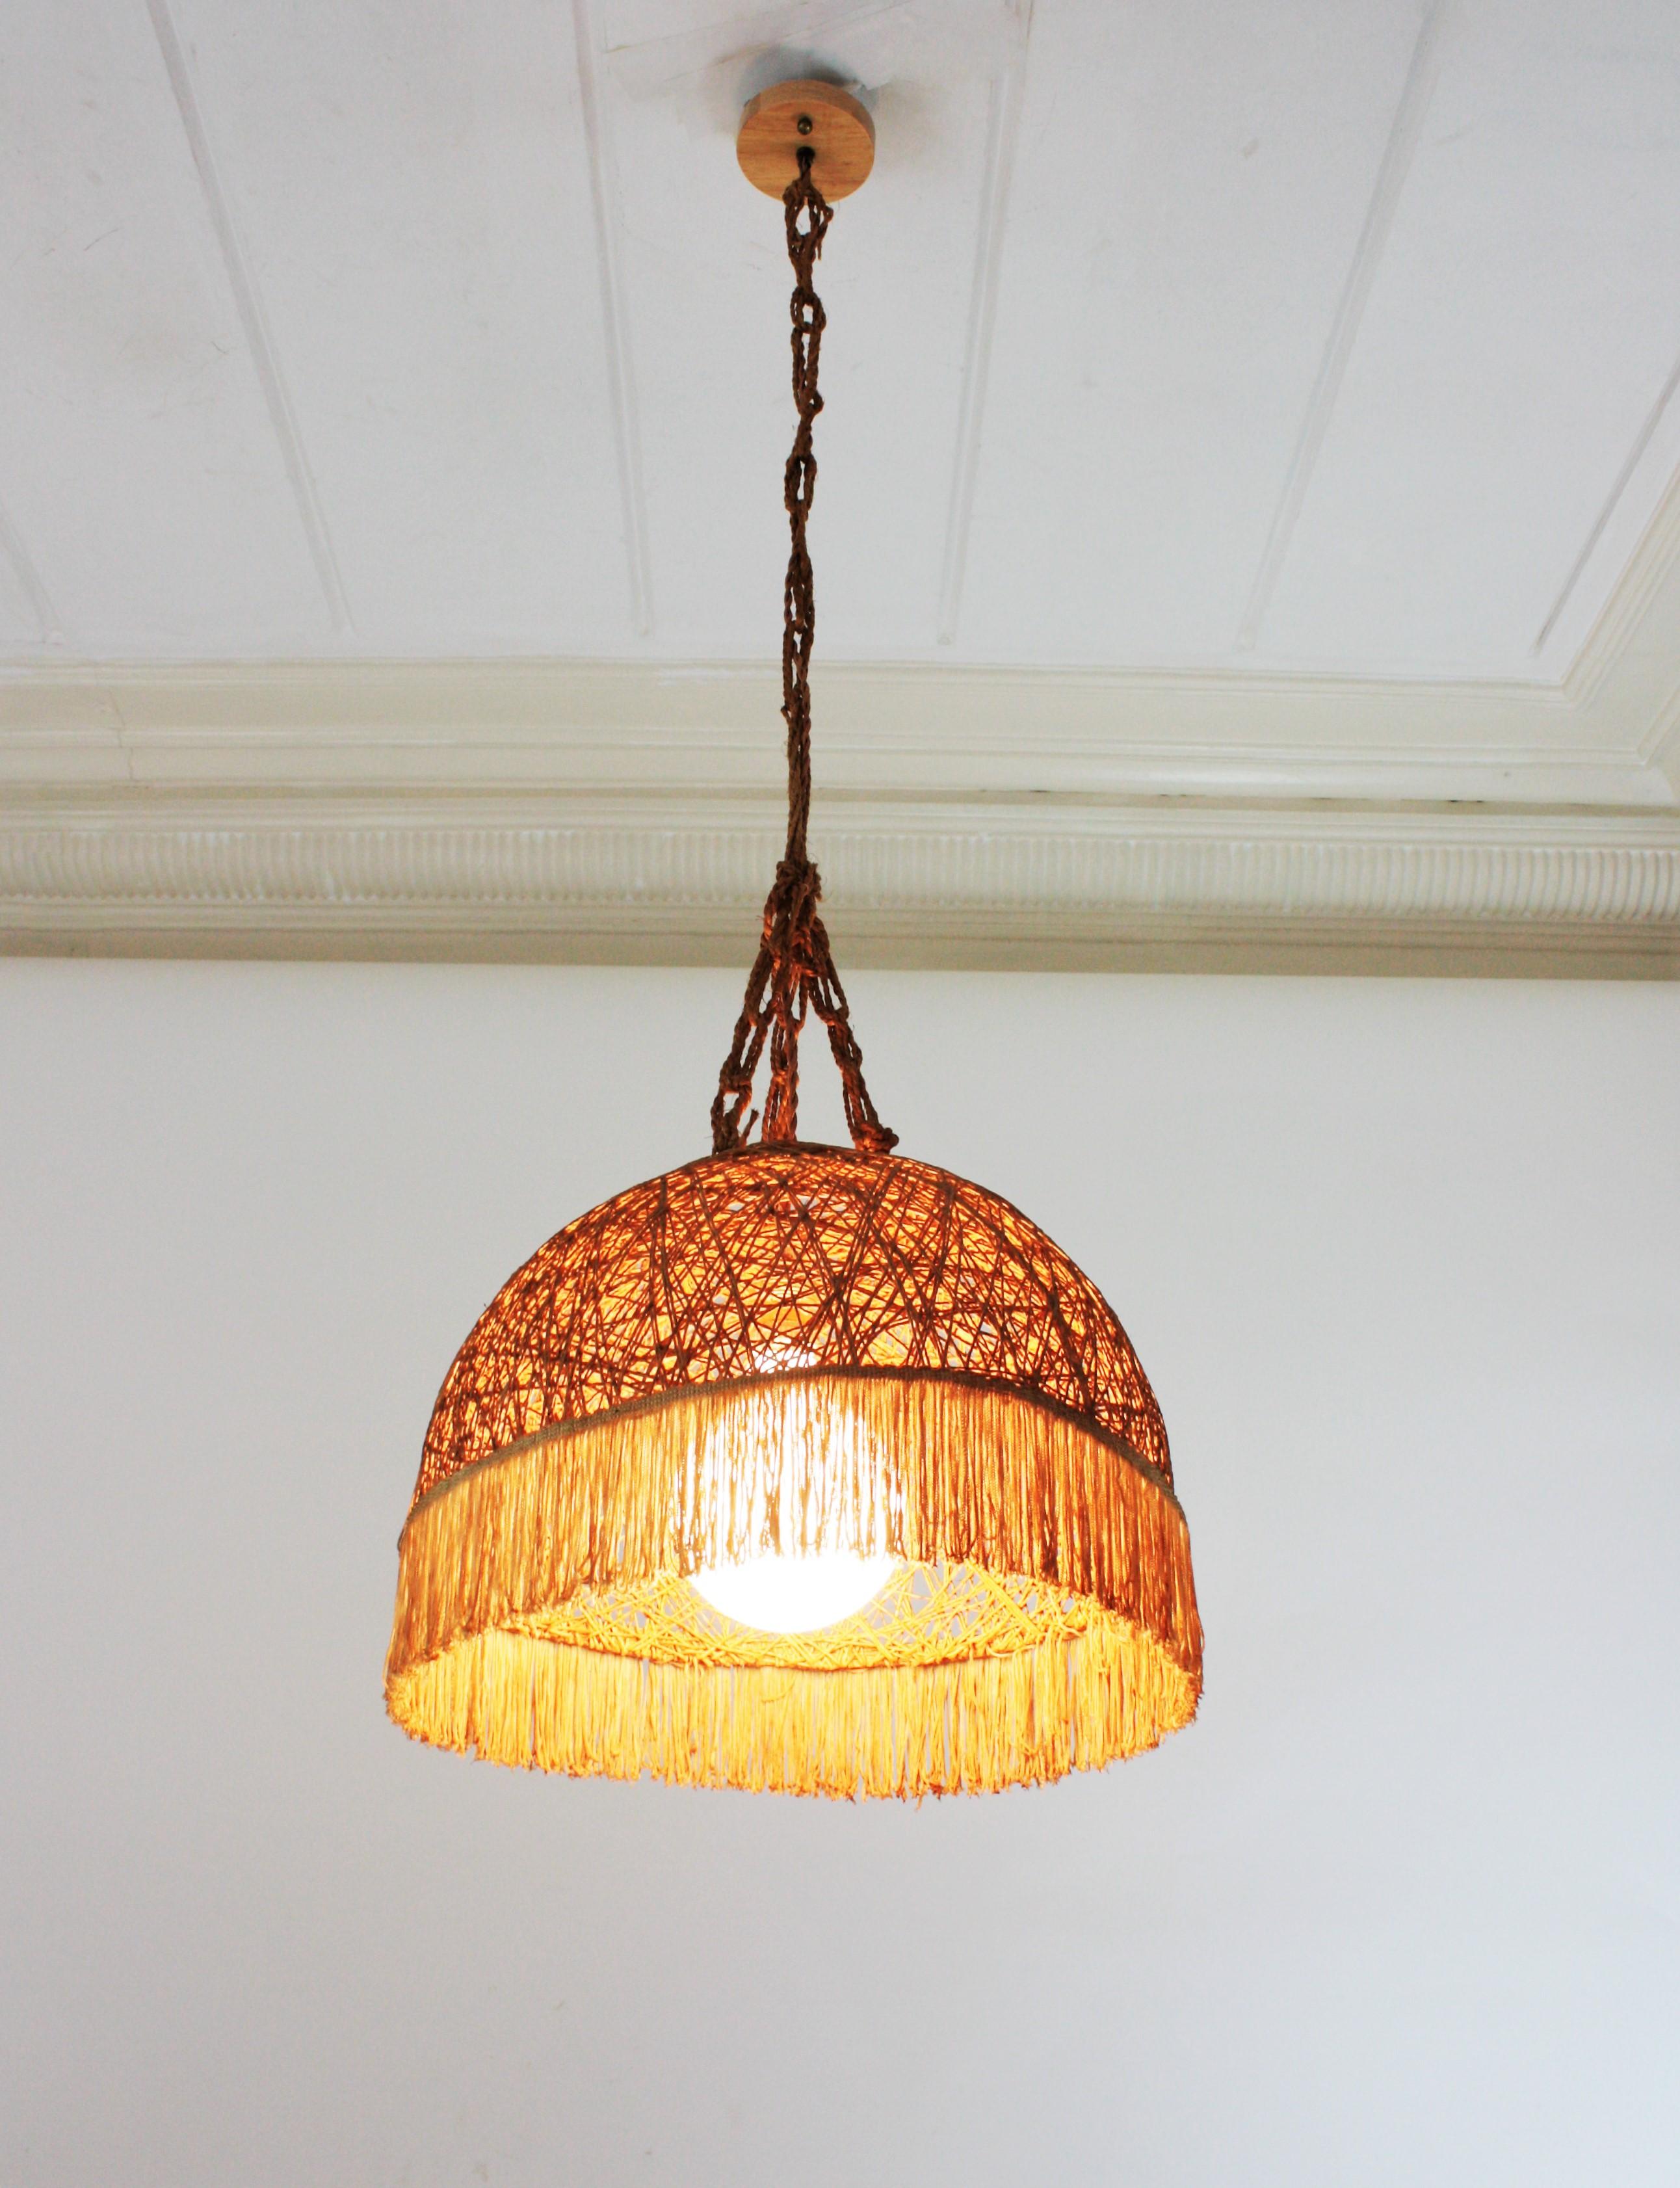 Spanish Rope Hand Woven Pendant Lamp / Suspension with Fringe For Sale 3